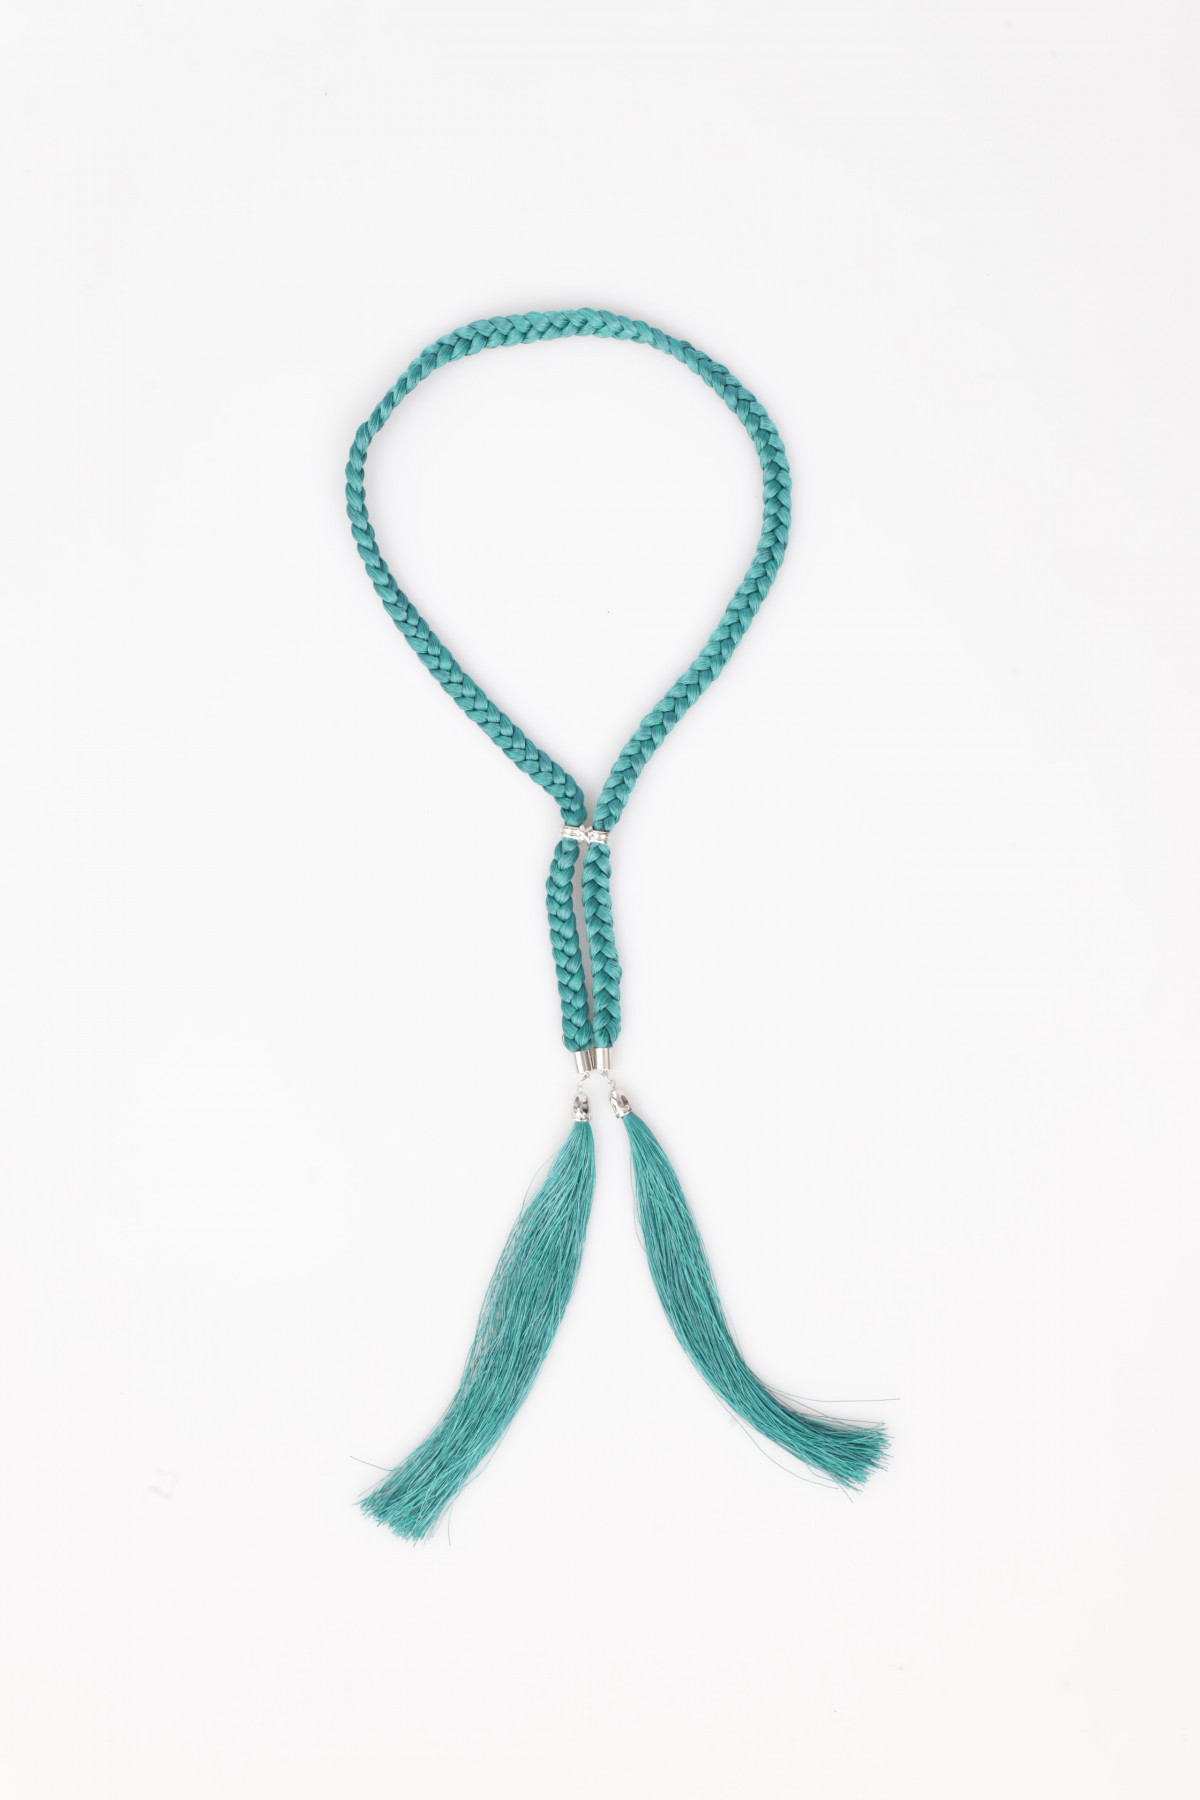 Braid Necklace with Tassels